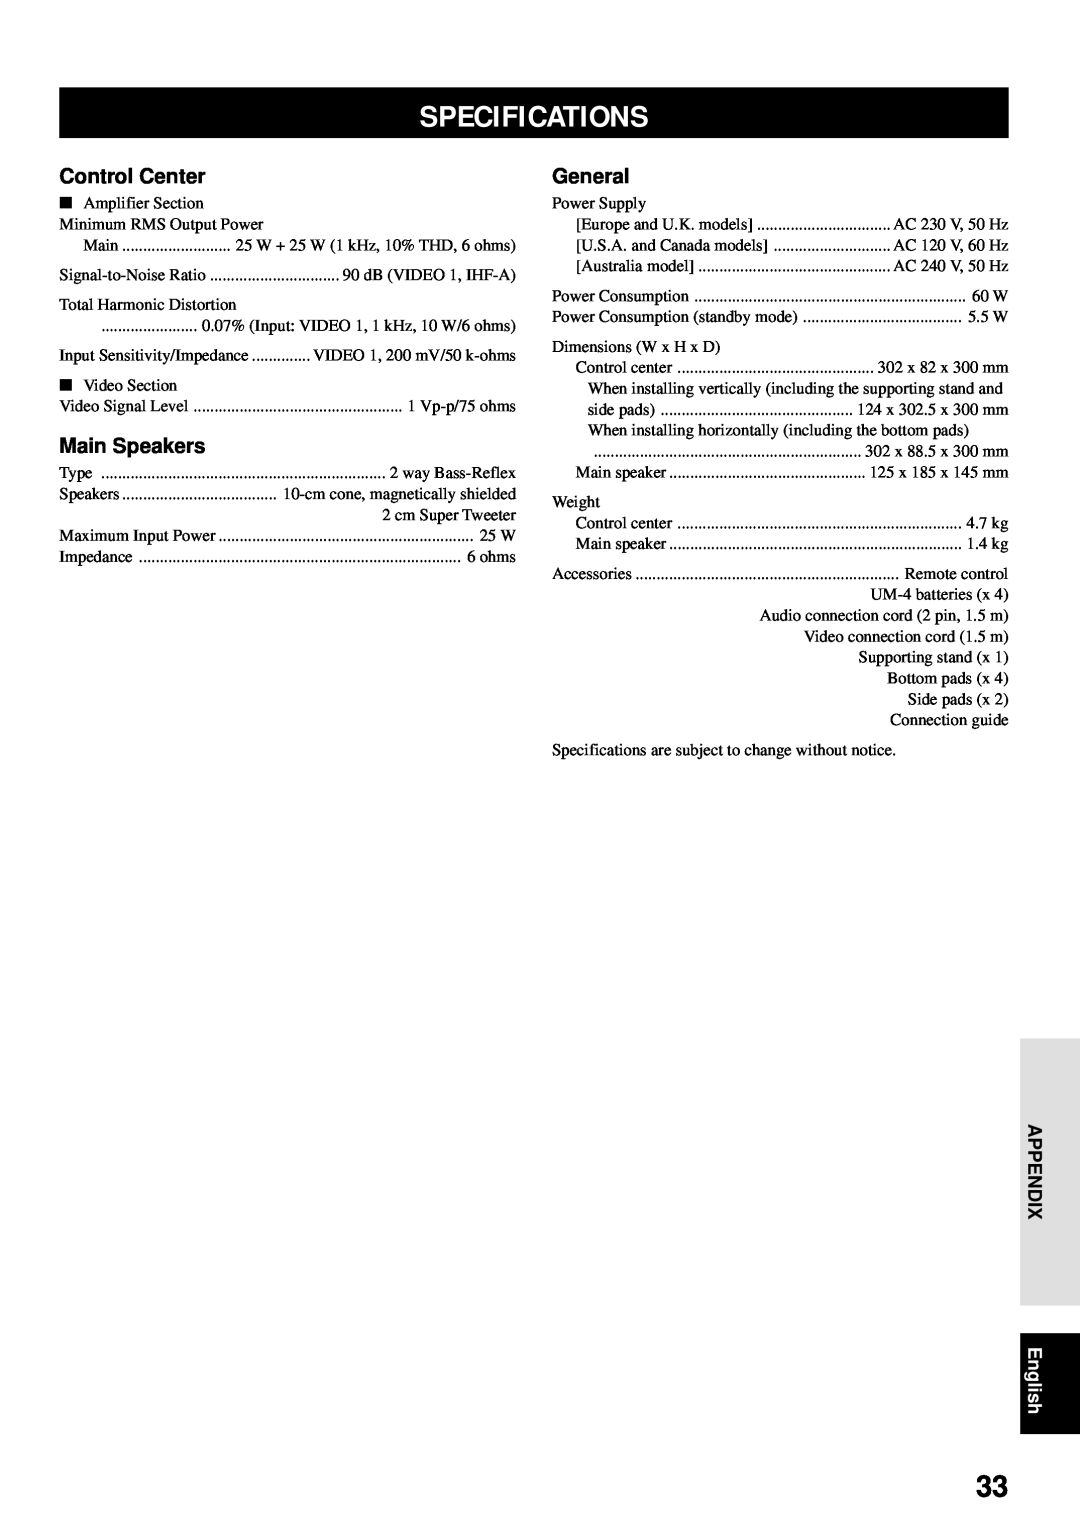 Yamaha VS-10 owner manual Specifications, Control Center, Main Speakers, General, Appendix, English 